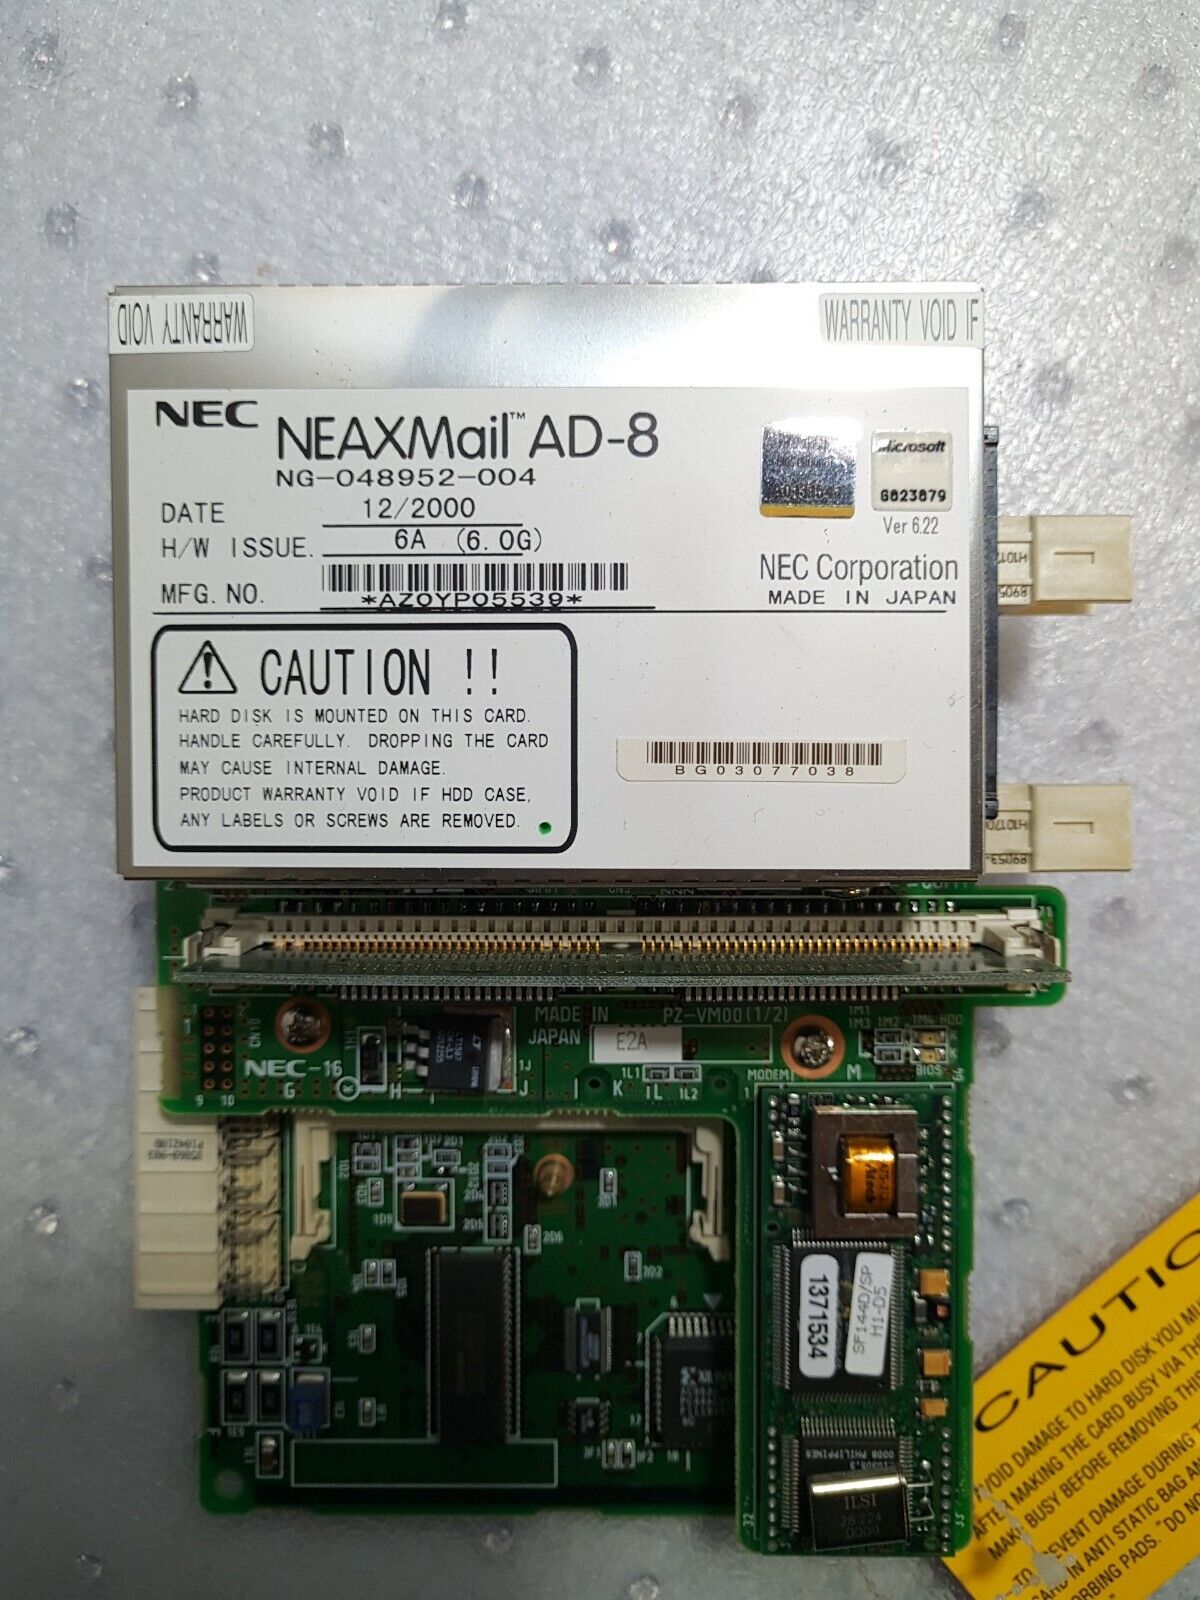 - NEC NEAX 2000 IVS NEAXMail AD-8 Voicemail Card NG-048952-004